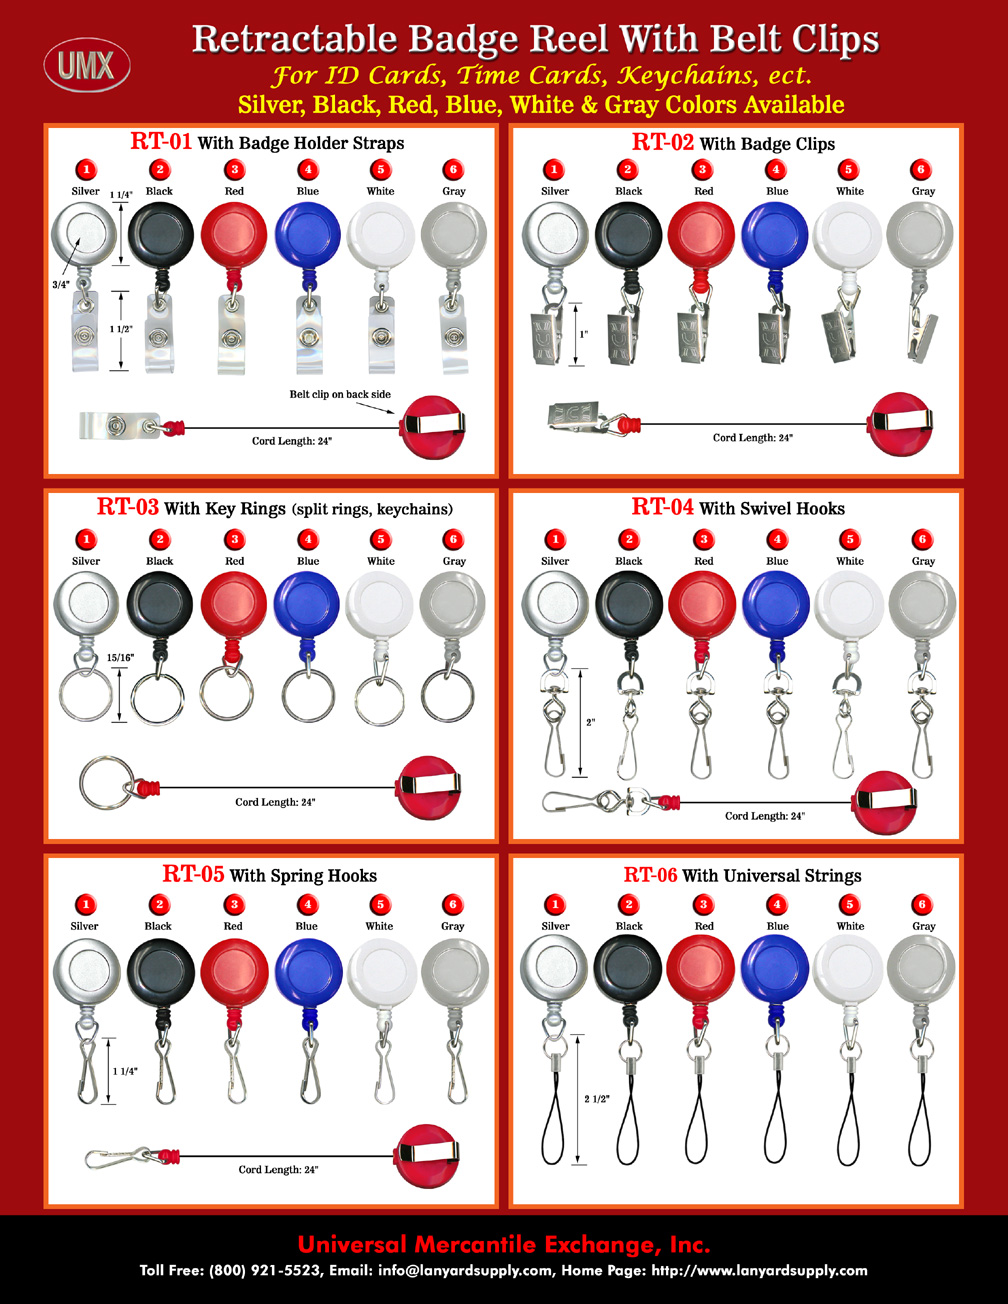 The plain round-shaped retractable badge holders are one of the most popular picks.